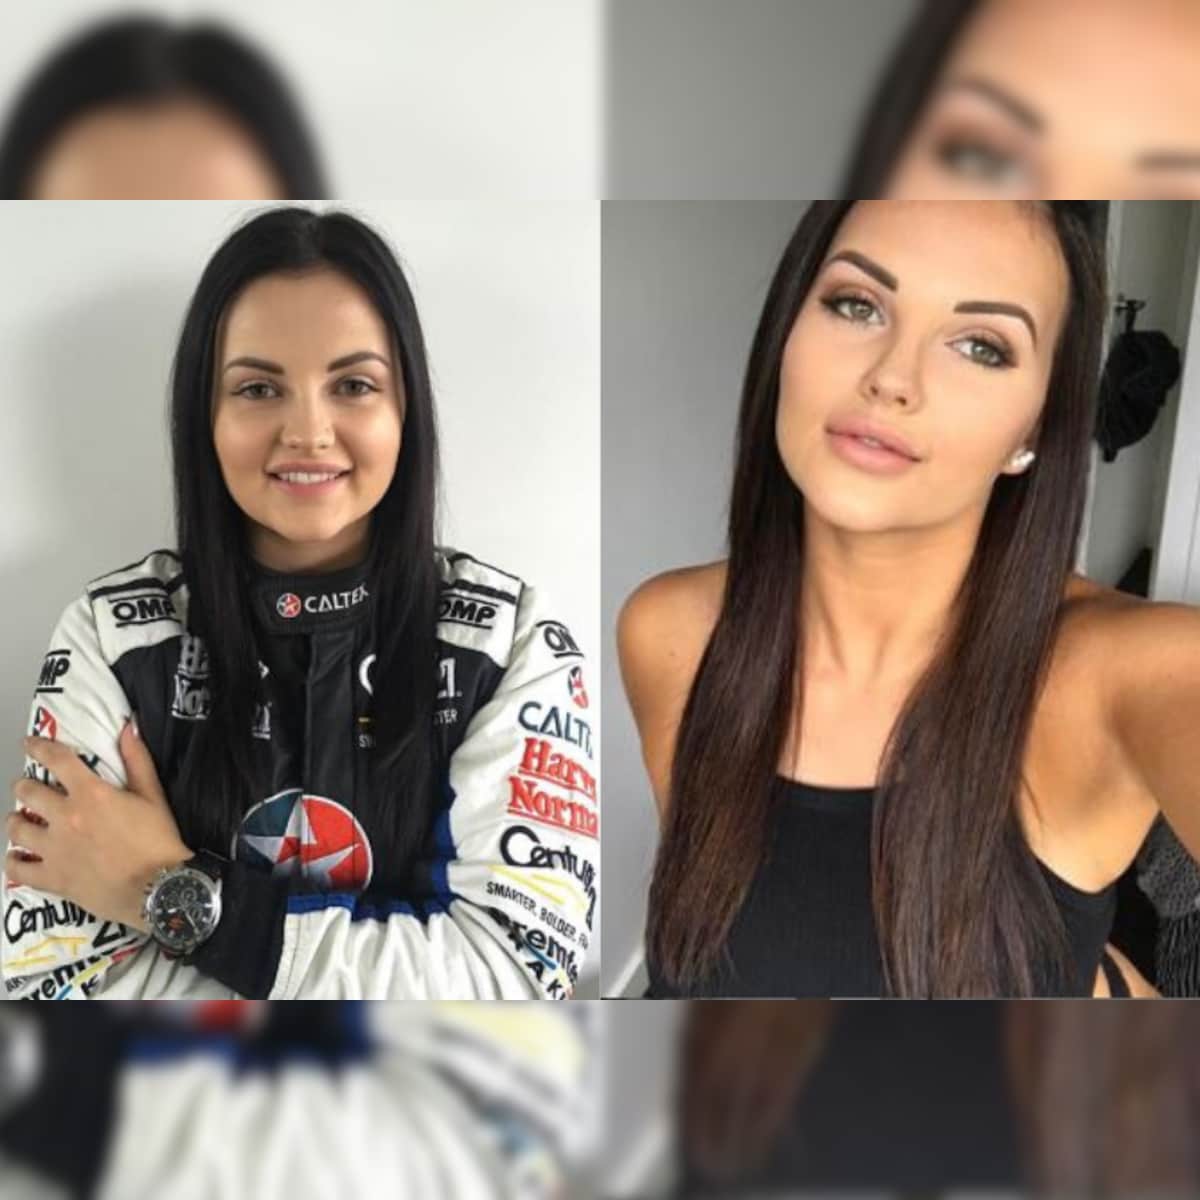 Kirti Surash Xxx Image - Supercars Racer Renee Gracie is Enjoying Career Switch to Selling Adult  Videos as it Gives Her 'Good Money'